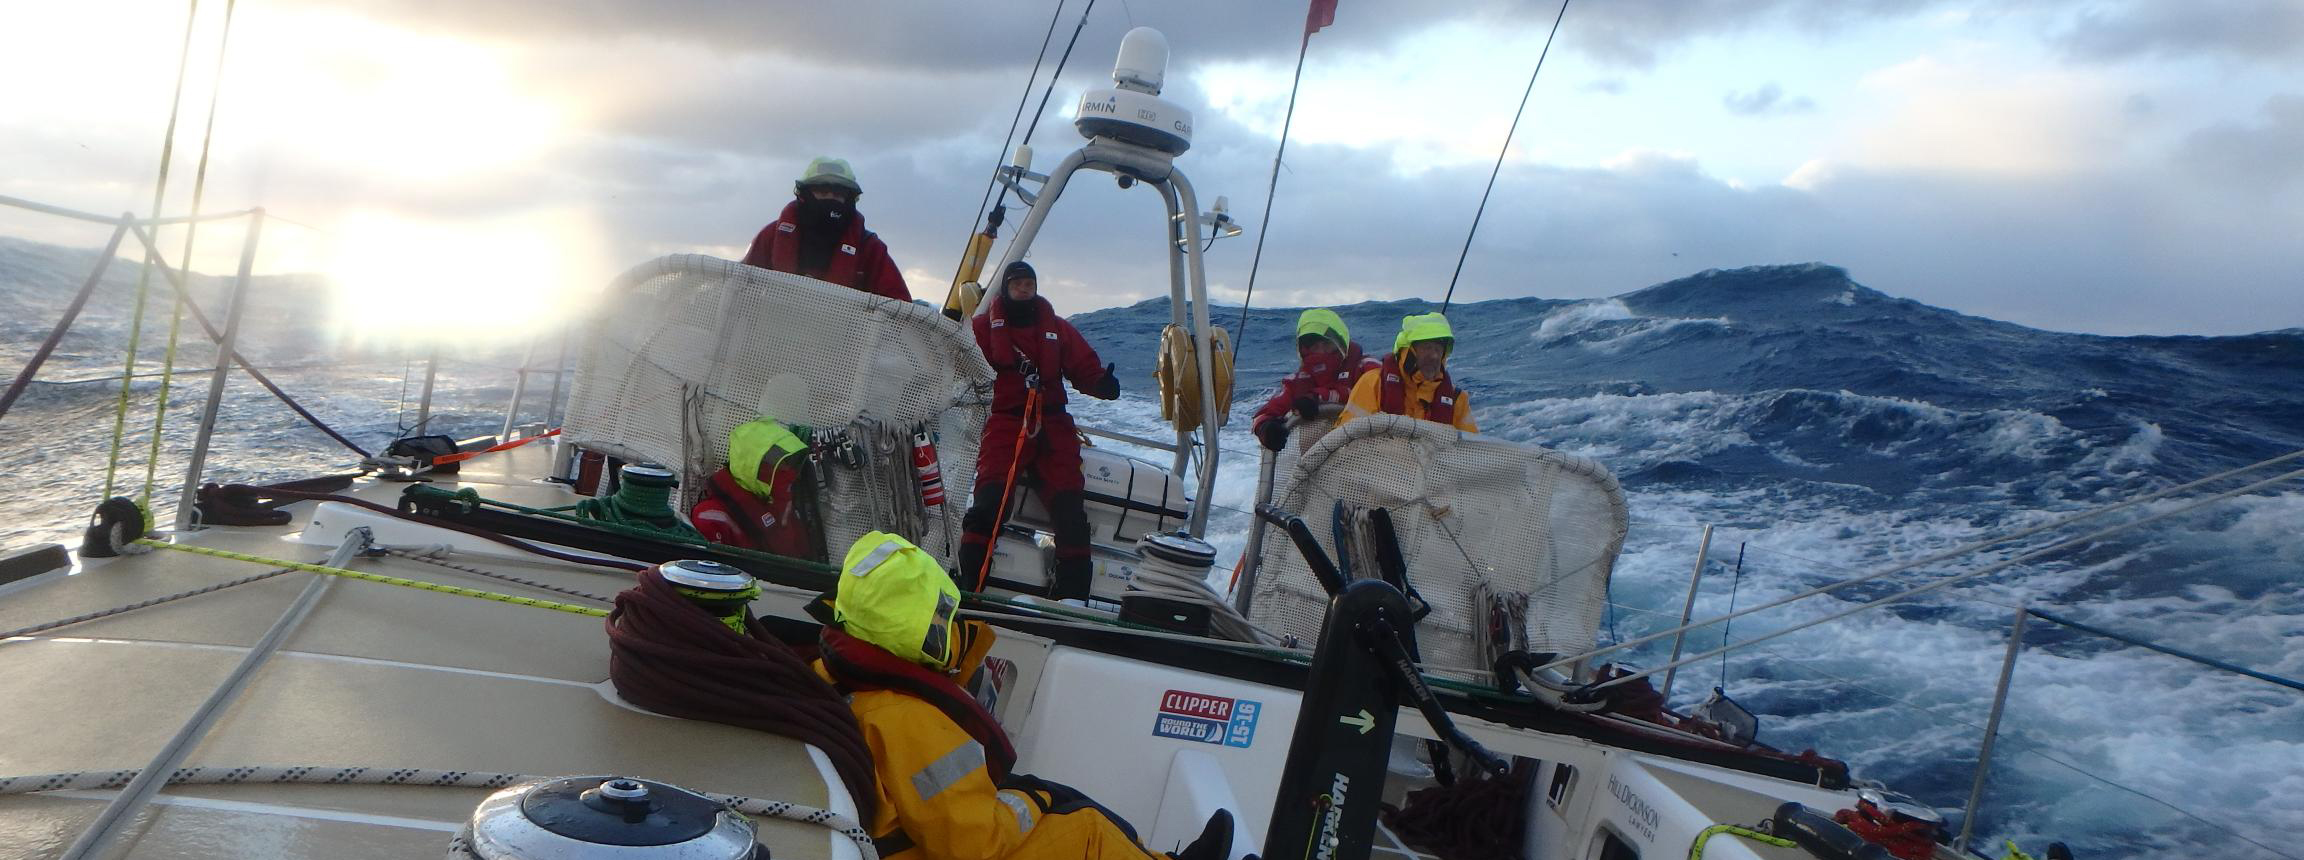 ​Race 8 Day 11: Violent storm hits fleet with ‘extreme’ conditions and 70 knot winds 